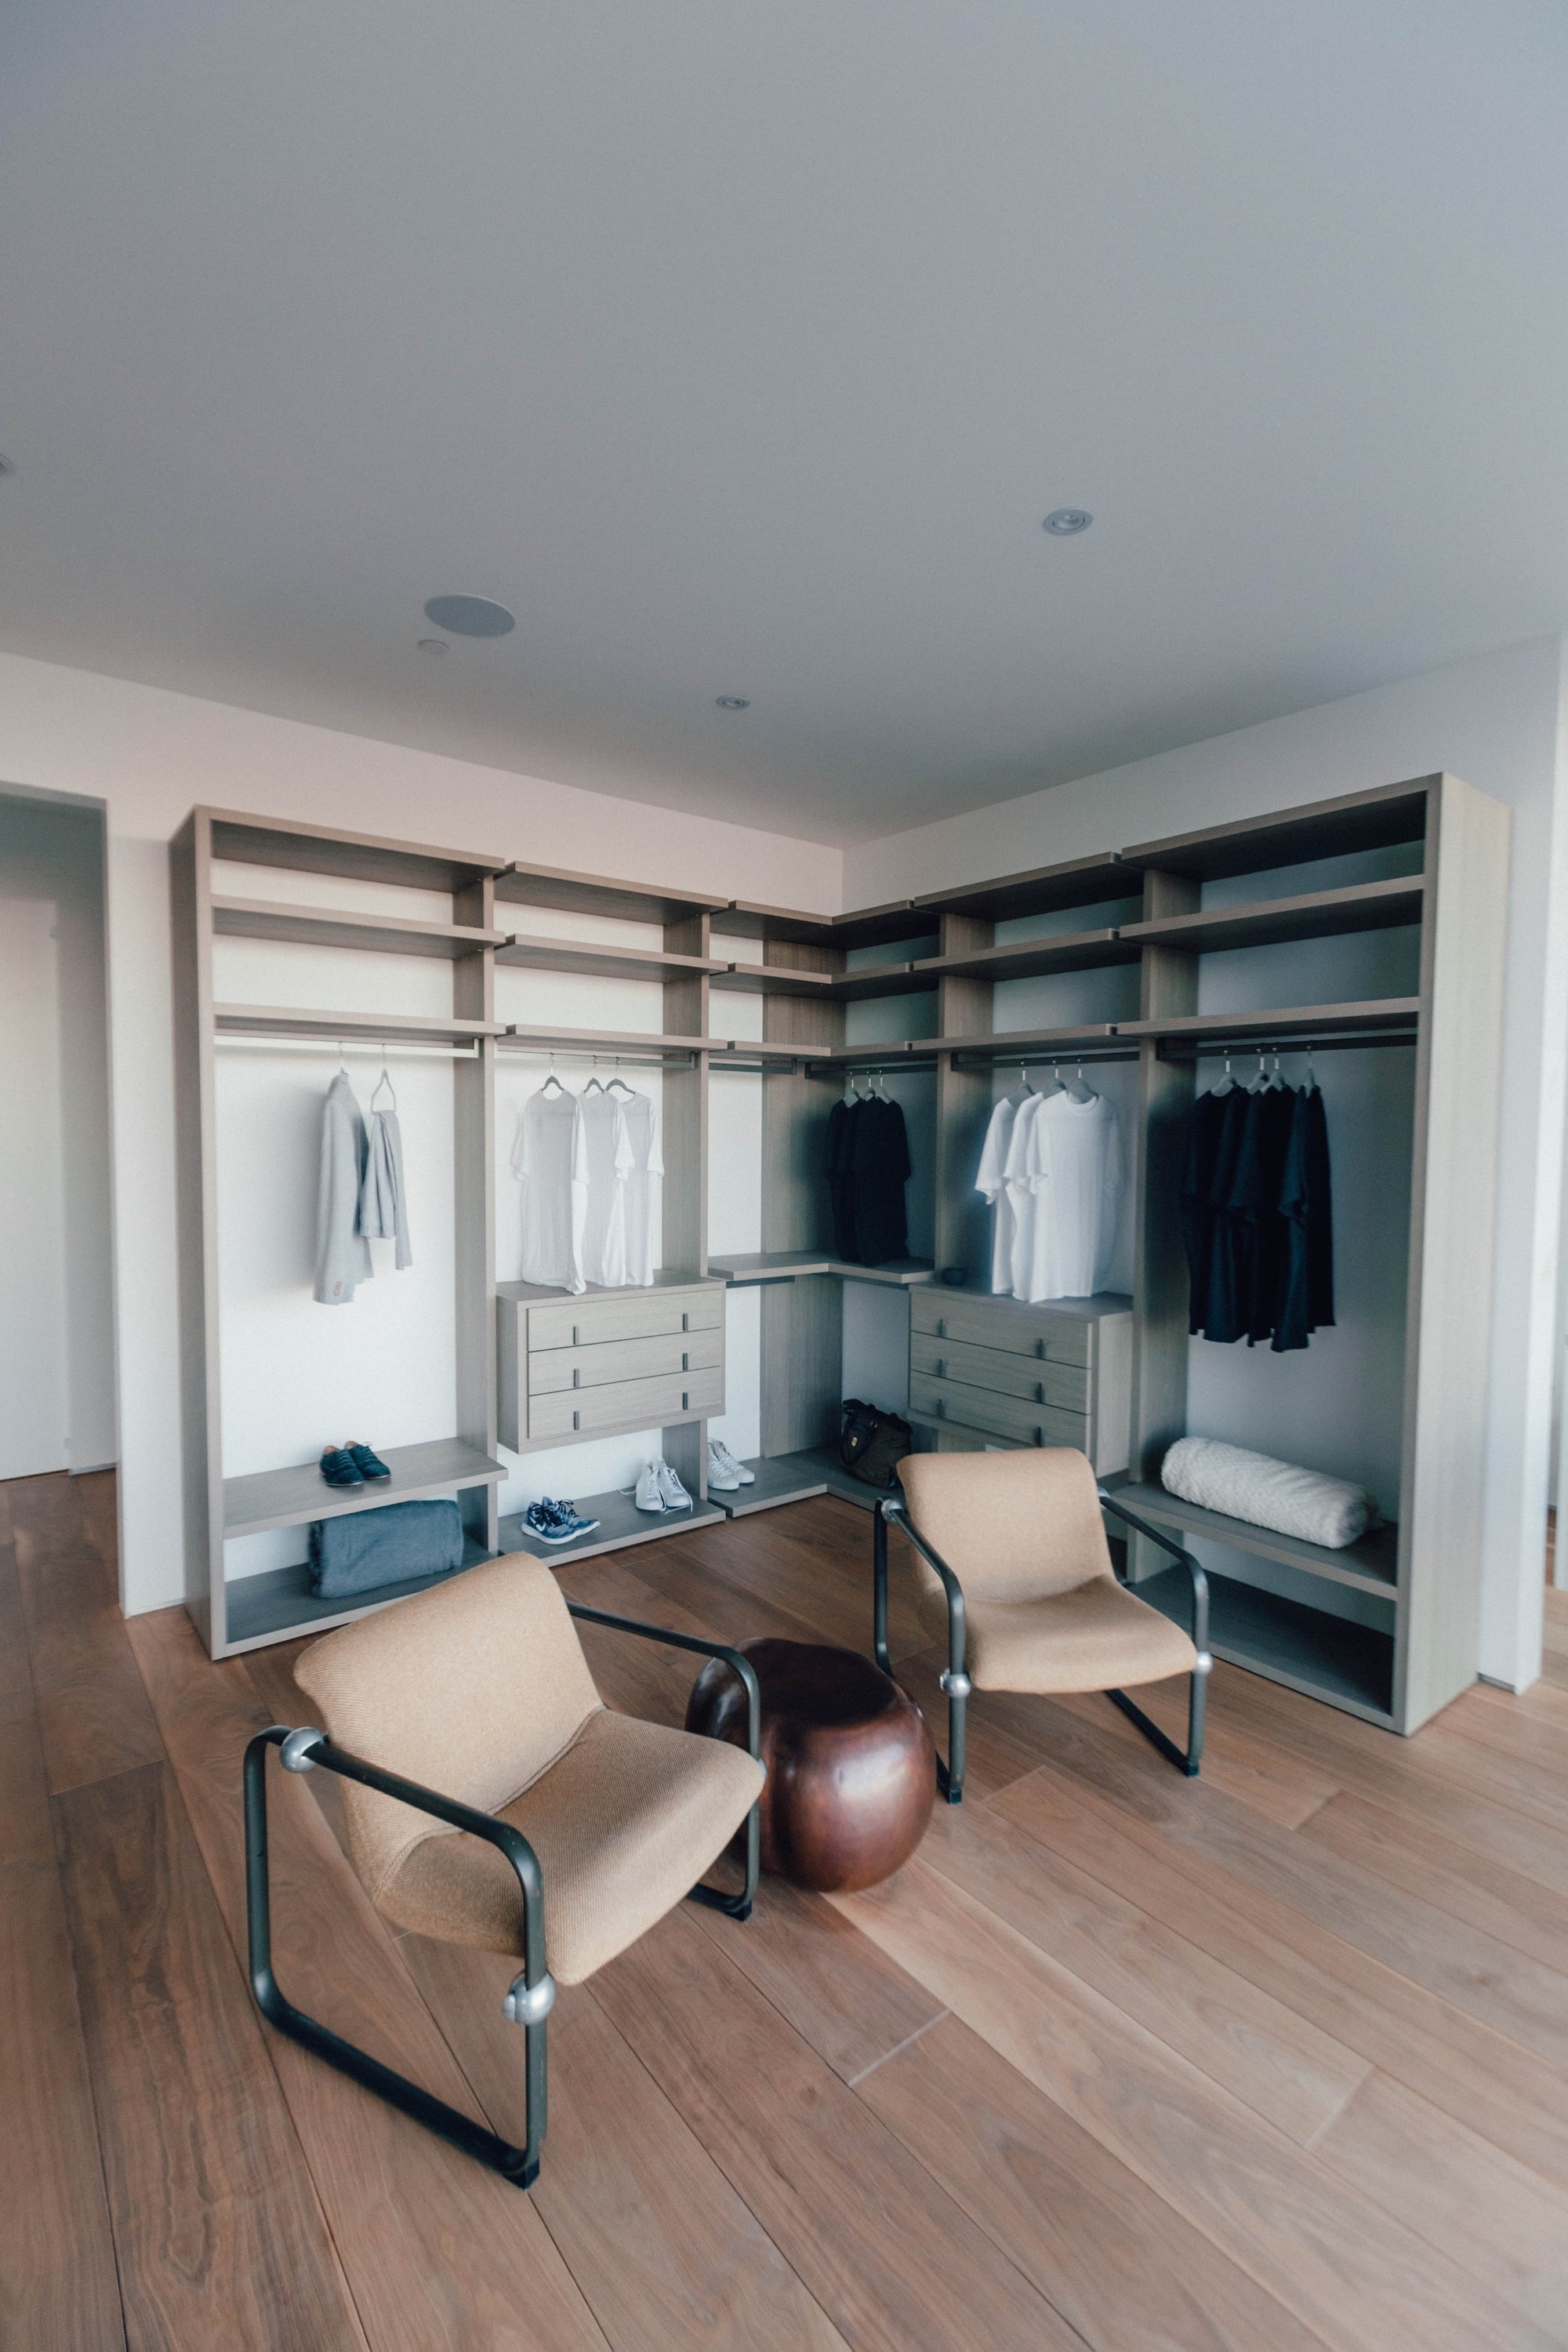 custom closet with shelving and hanger rods built on wall non built in closet design